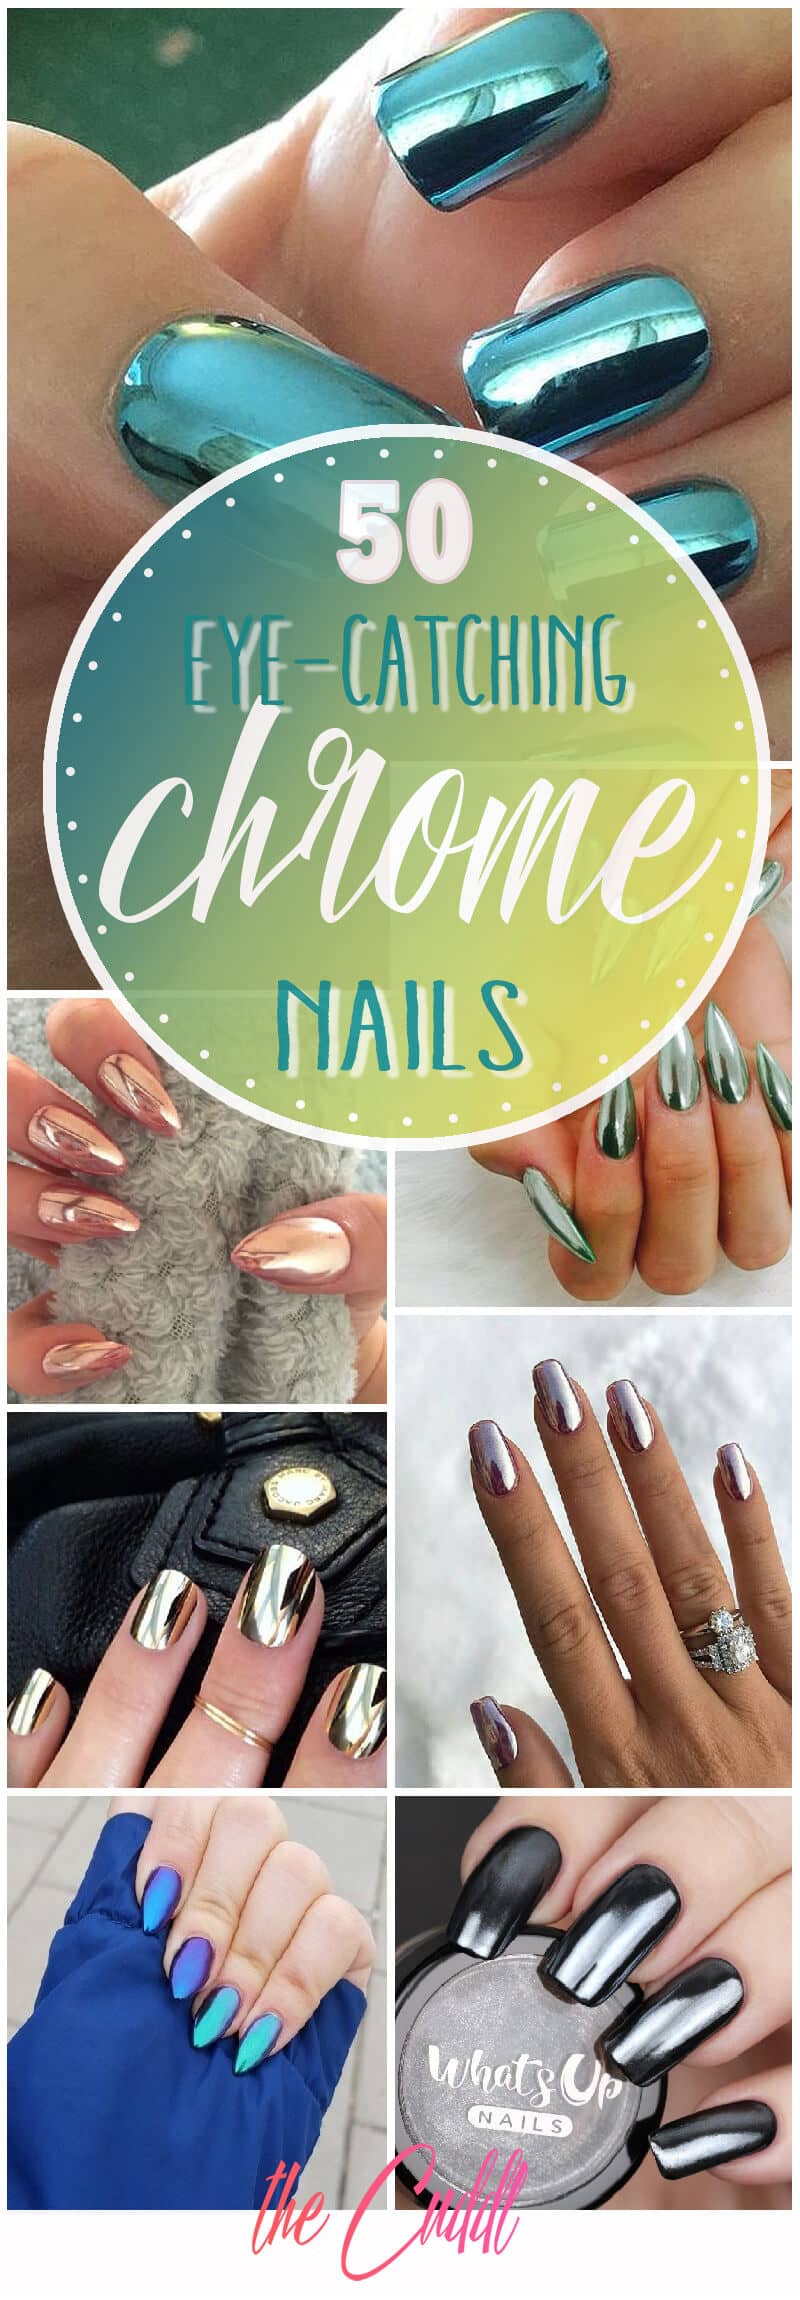 50 Eye-Catching Chrome Nails to Revolutionize Your Nails in 2022